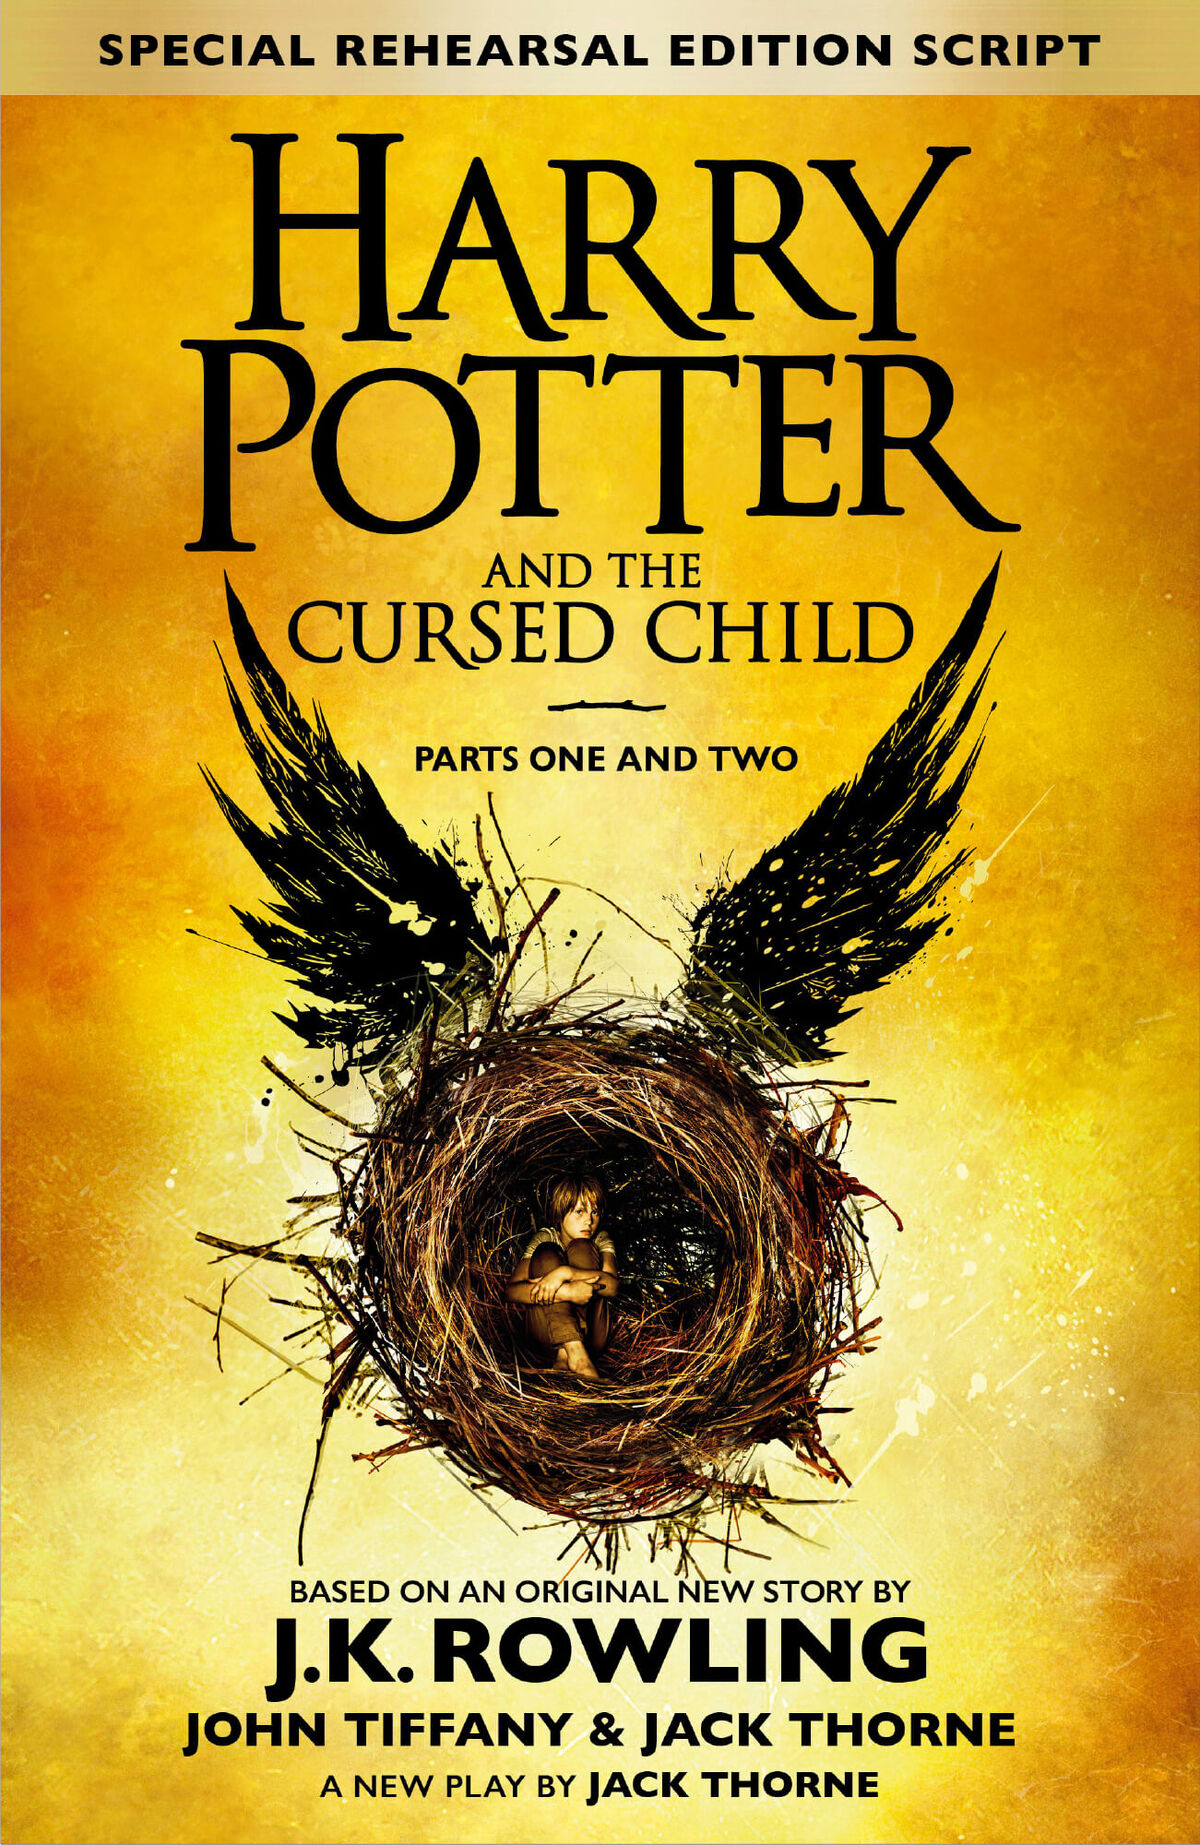 harry-potter-cursed-child-special-rehearsal-edition-book